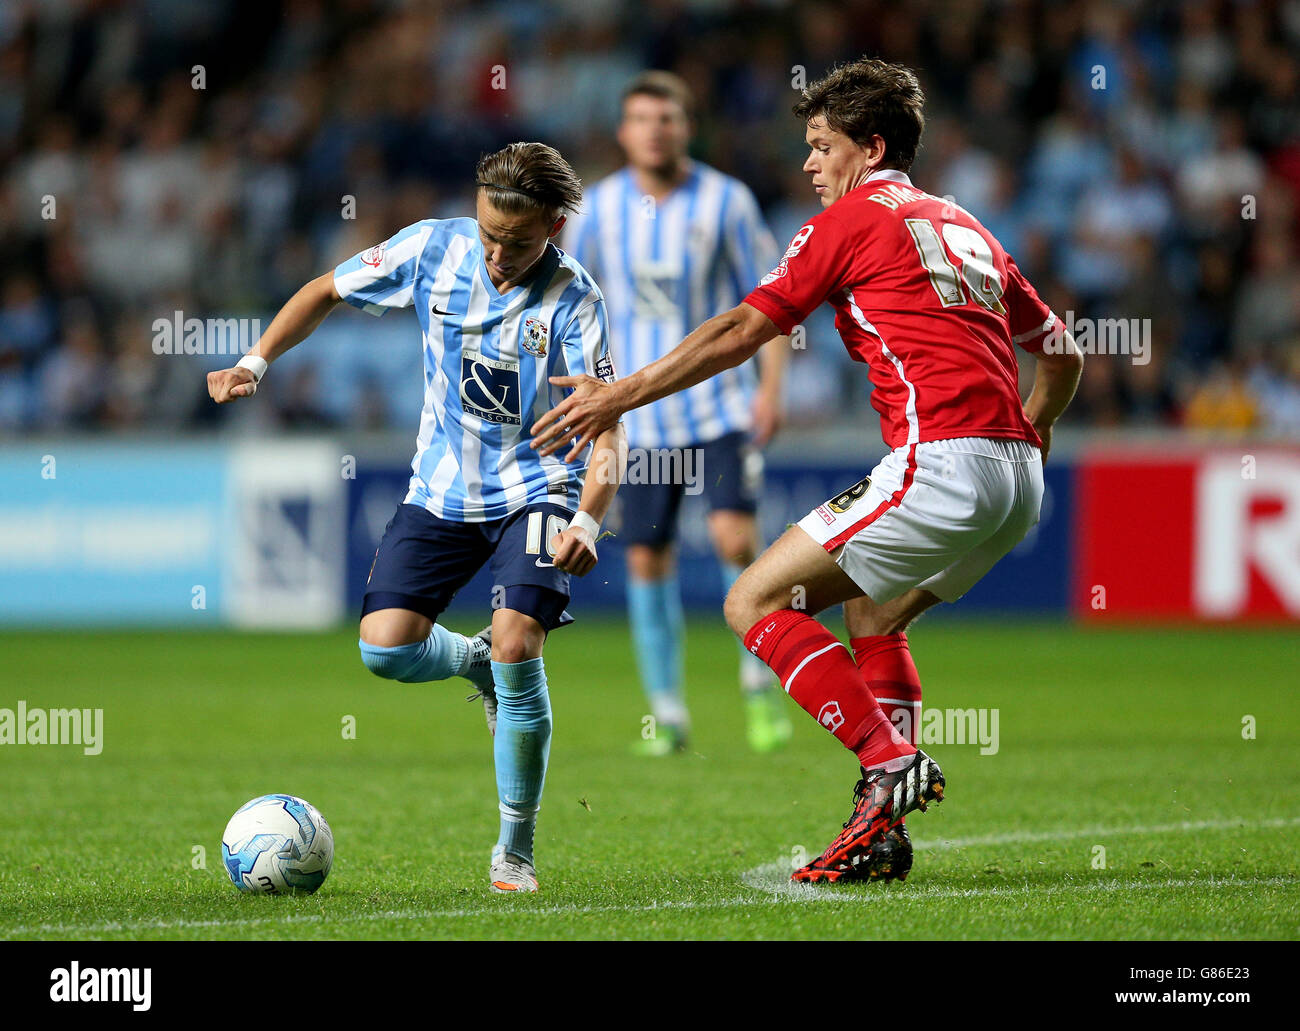 Coventry City's James Maddison (left) and Crewe Alexandra's Billy Bingham battle for the ball during the Sky Bet League One match at the Ricoh Arena, Coventry. Stock Photo